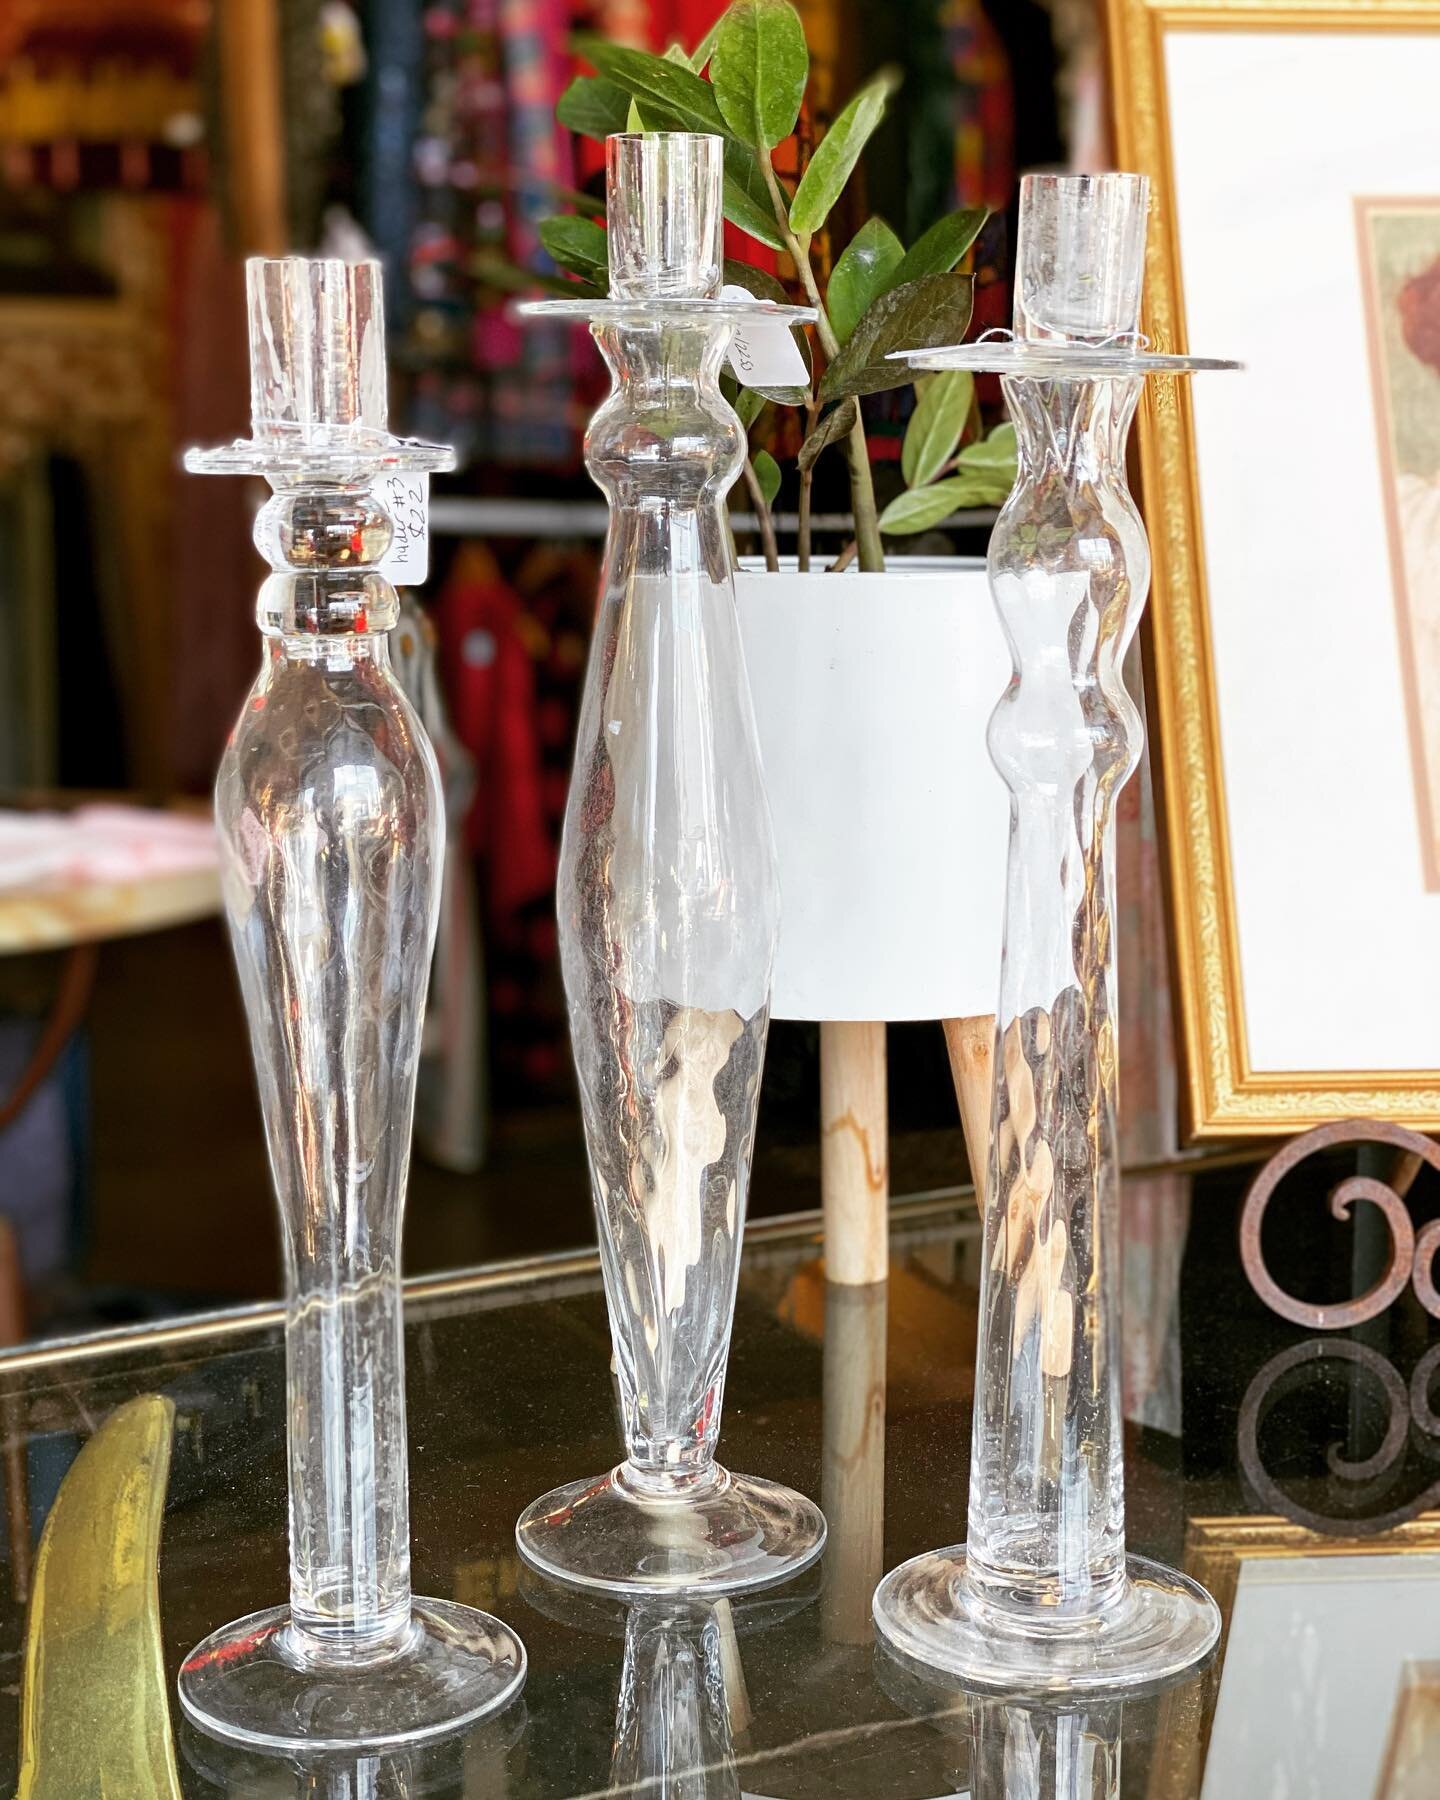 I love these hollow glass candlestick holders- $22 each or the set for $60
&bull;
SHIPPING $8